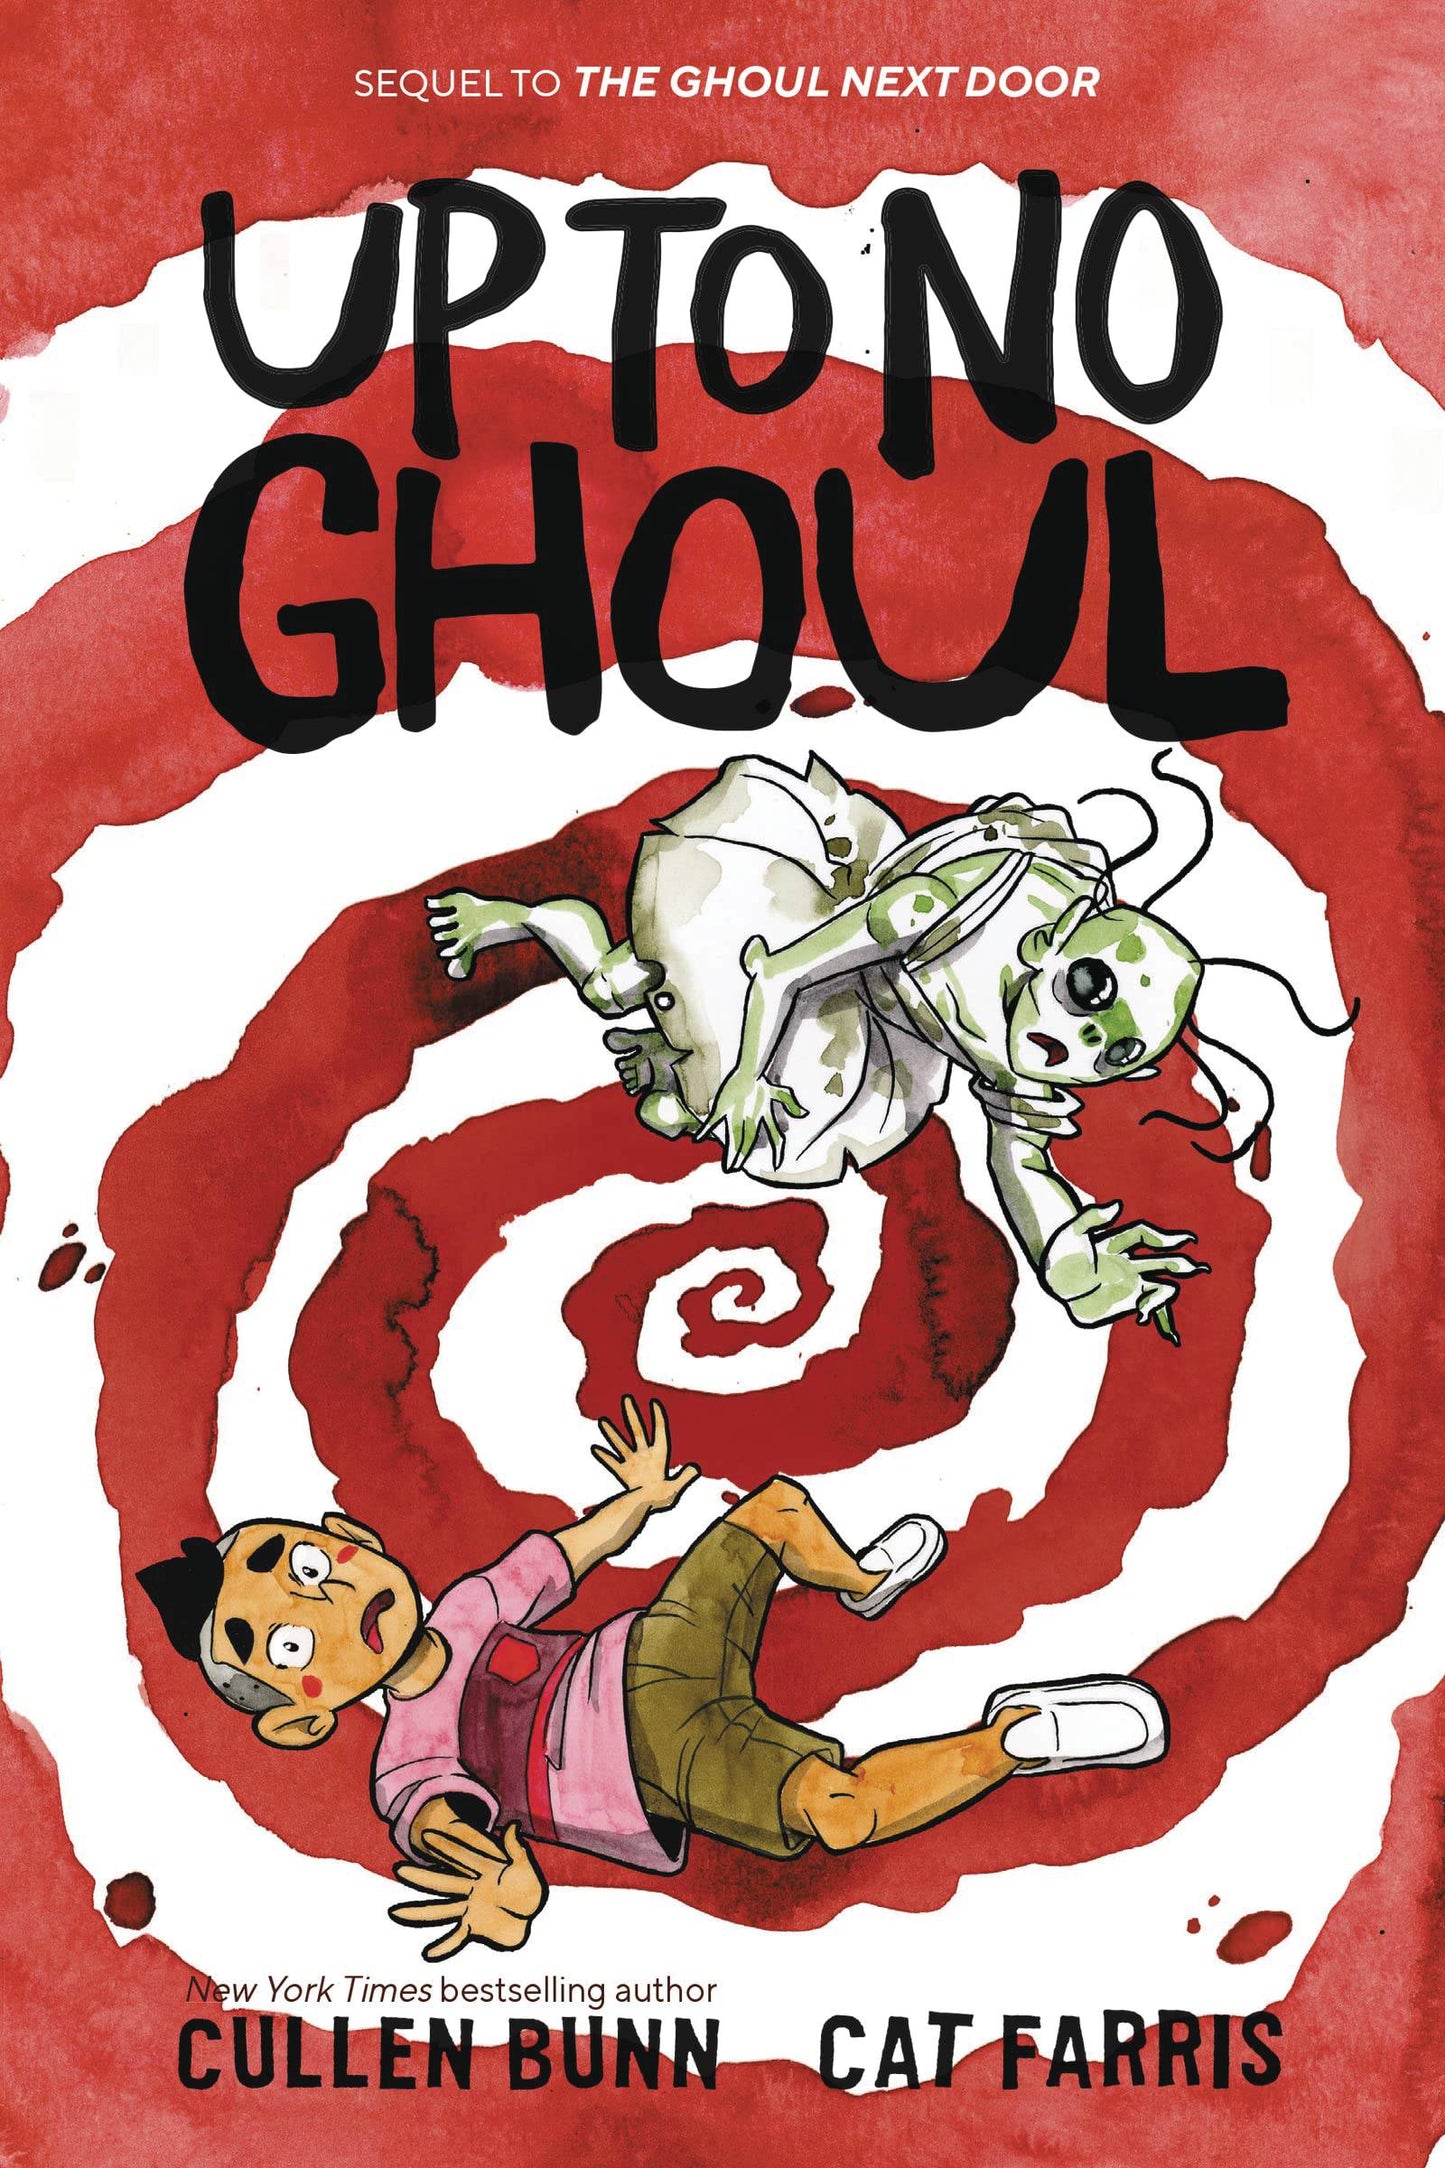 The One Stop Shop Comics & Games Up To No Ghoul Gn (C: 0-1-0) (08/10/2022) HARPER ALLEY